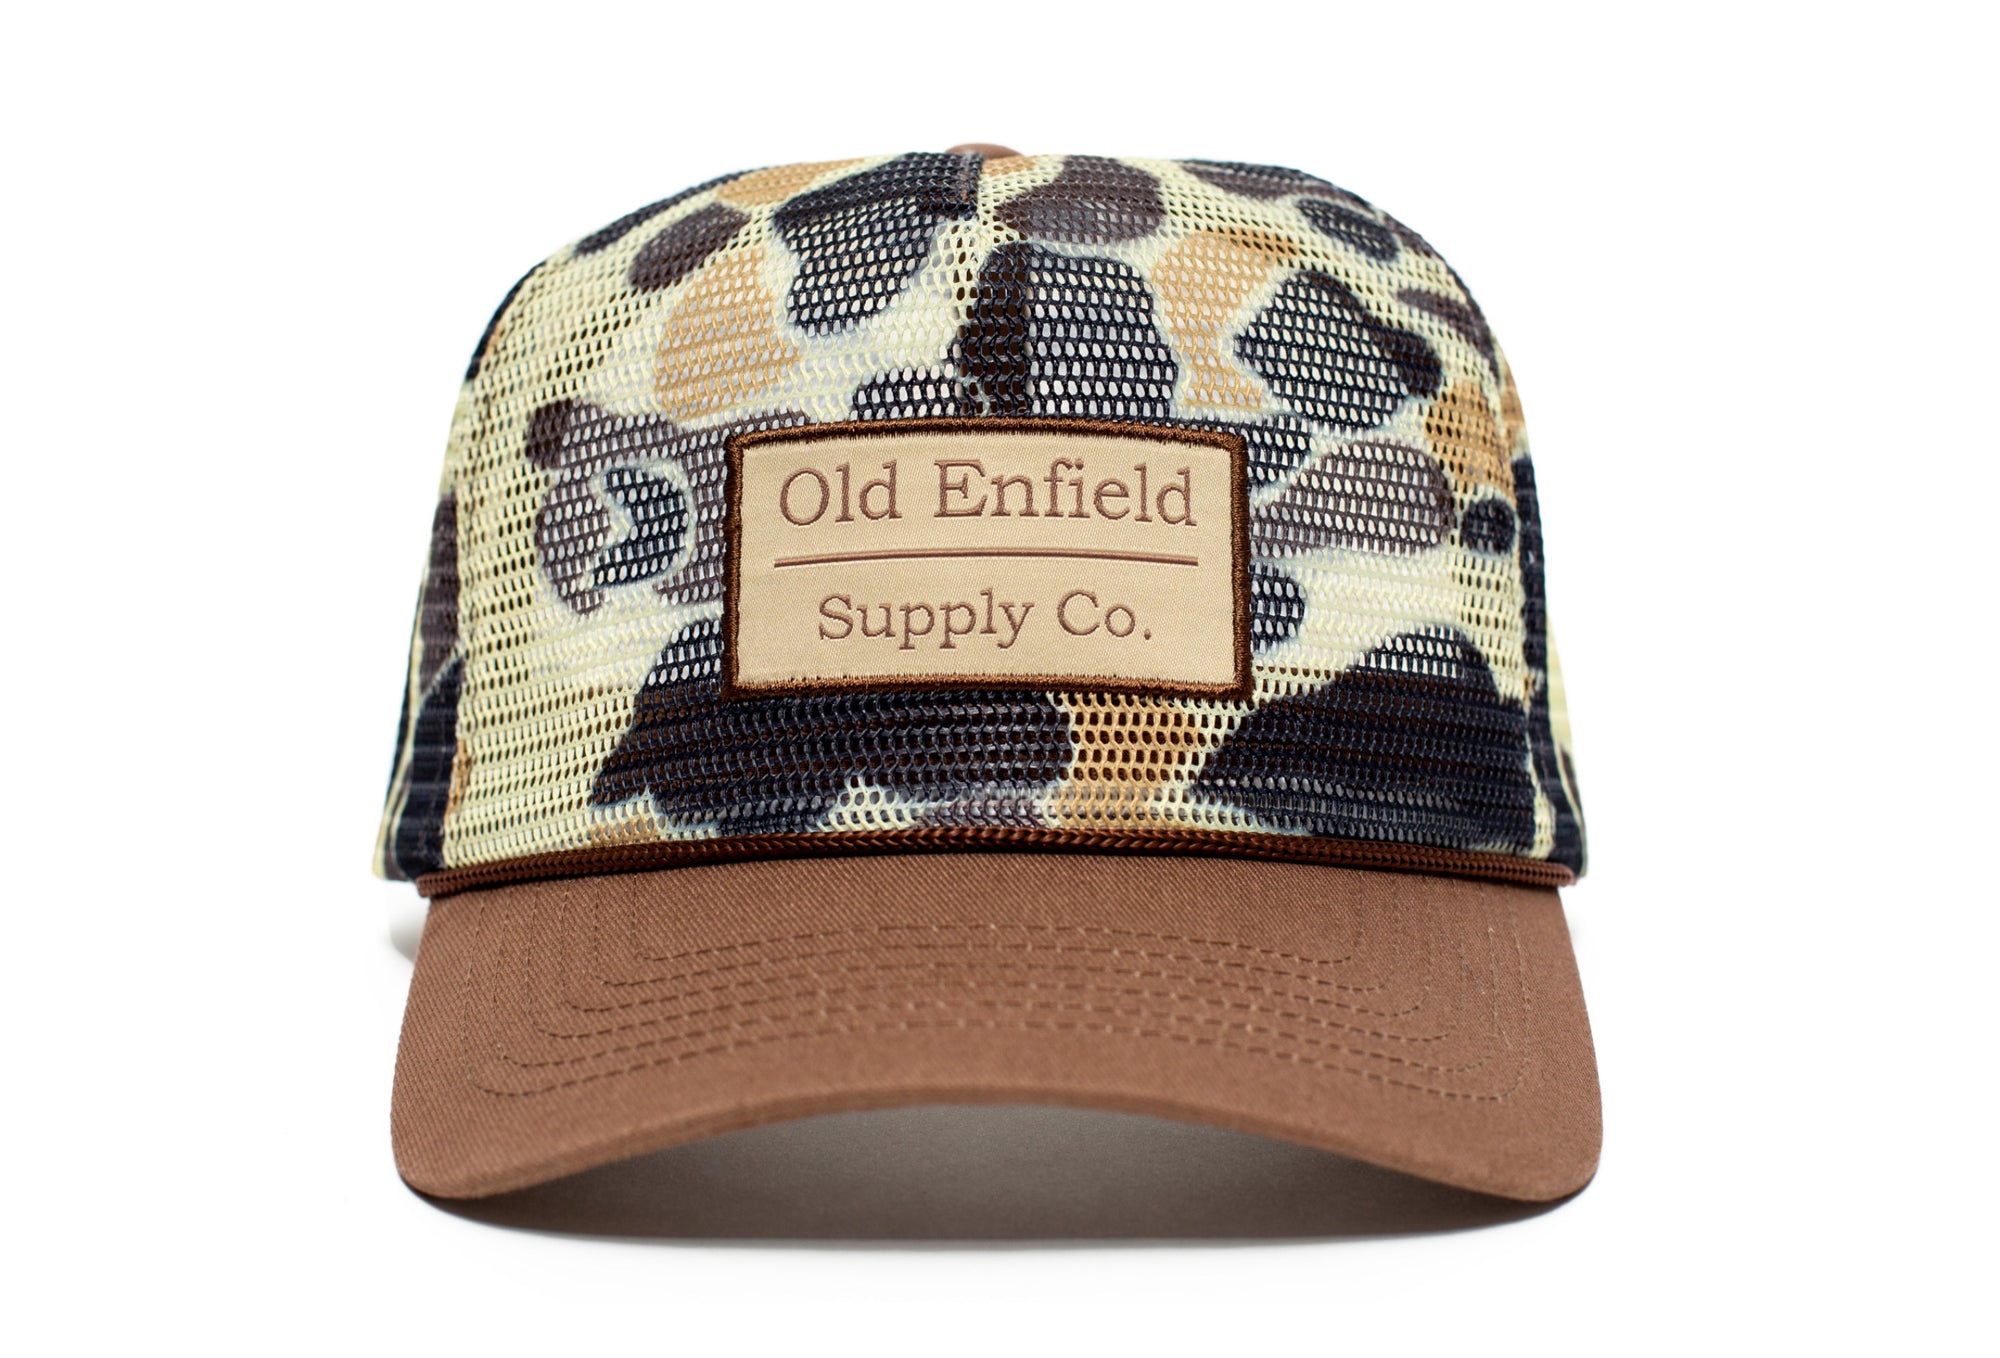 camo mesh hat, vintage rope hat, snapback hat mens, vintage camo hat, snapback rope hat, camo trucker hat, hunting, fishing, old enfield supply co.